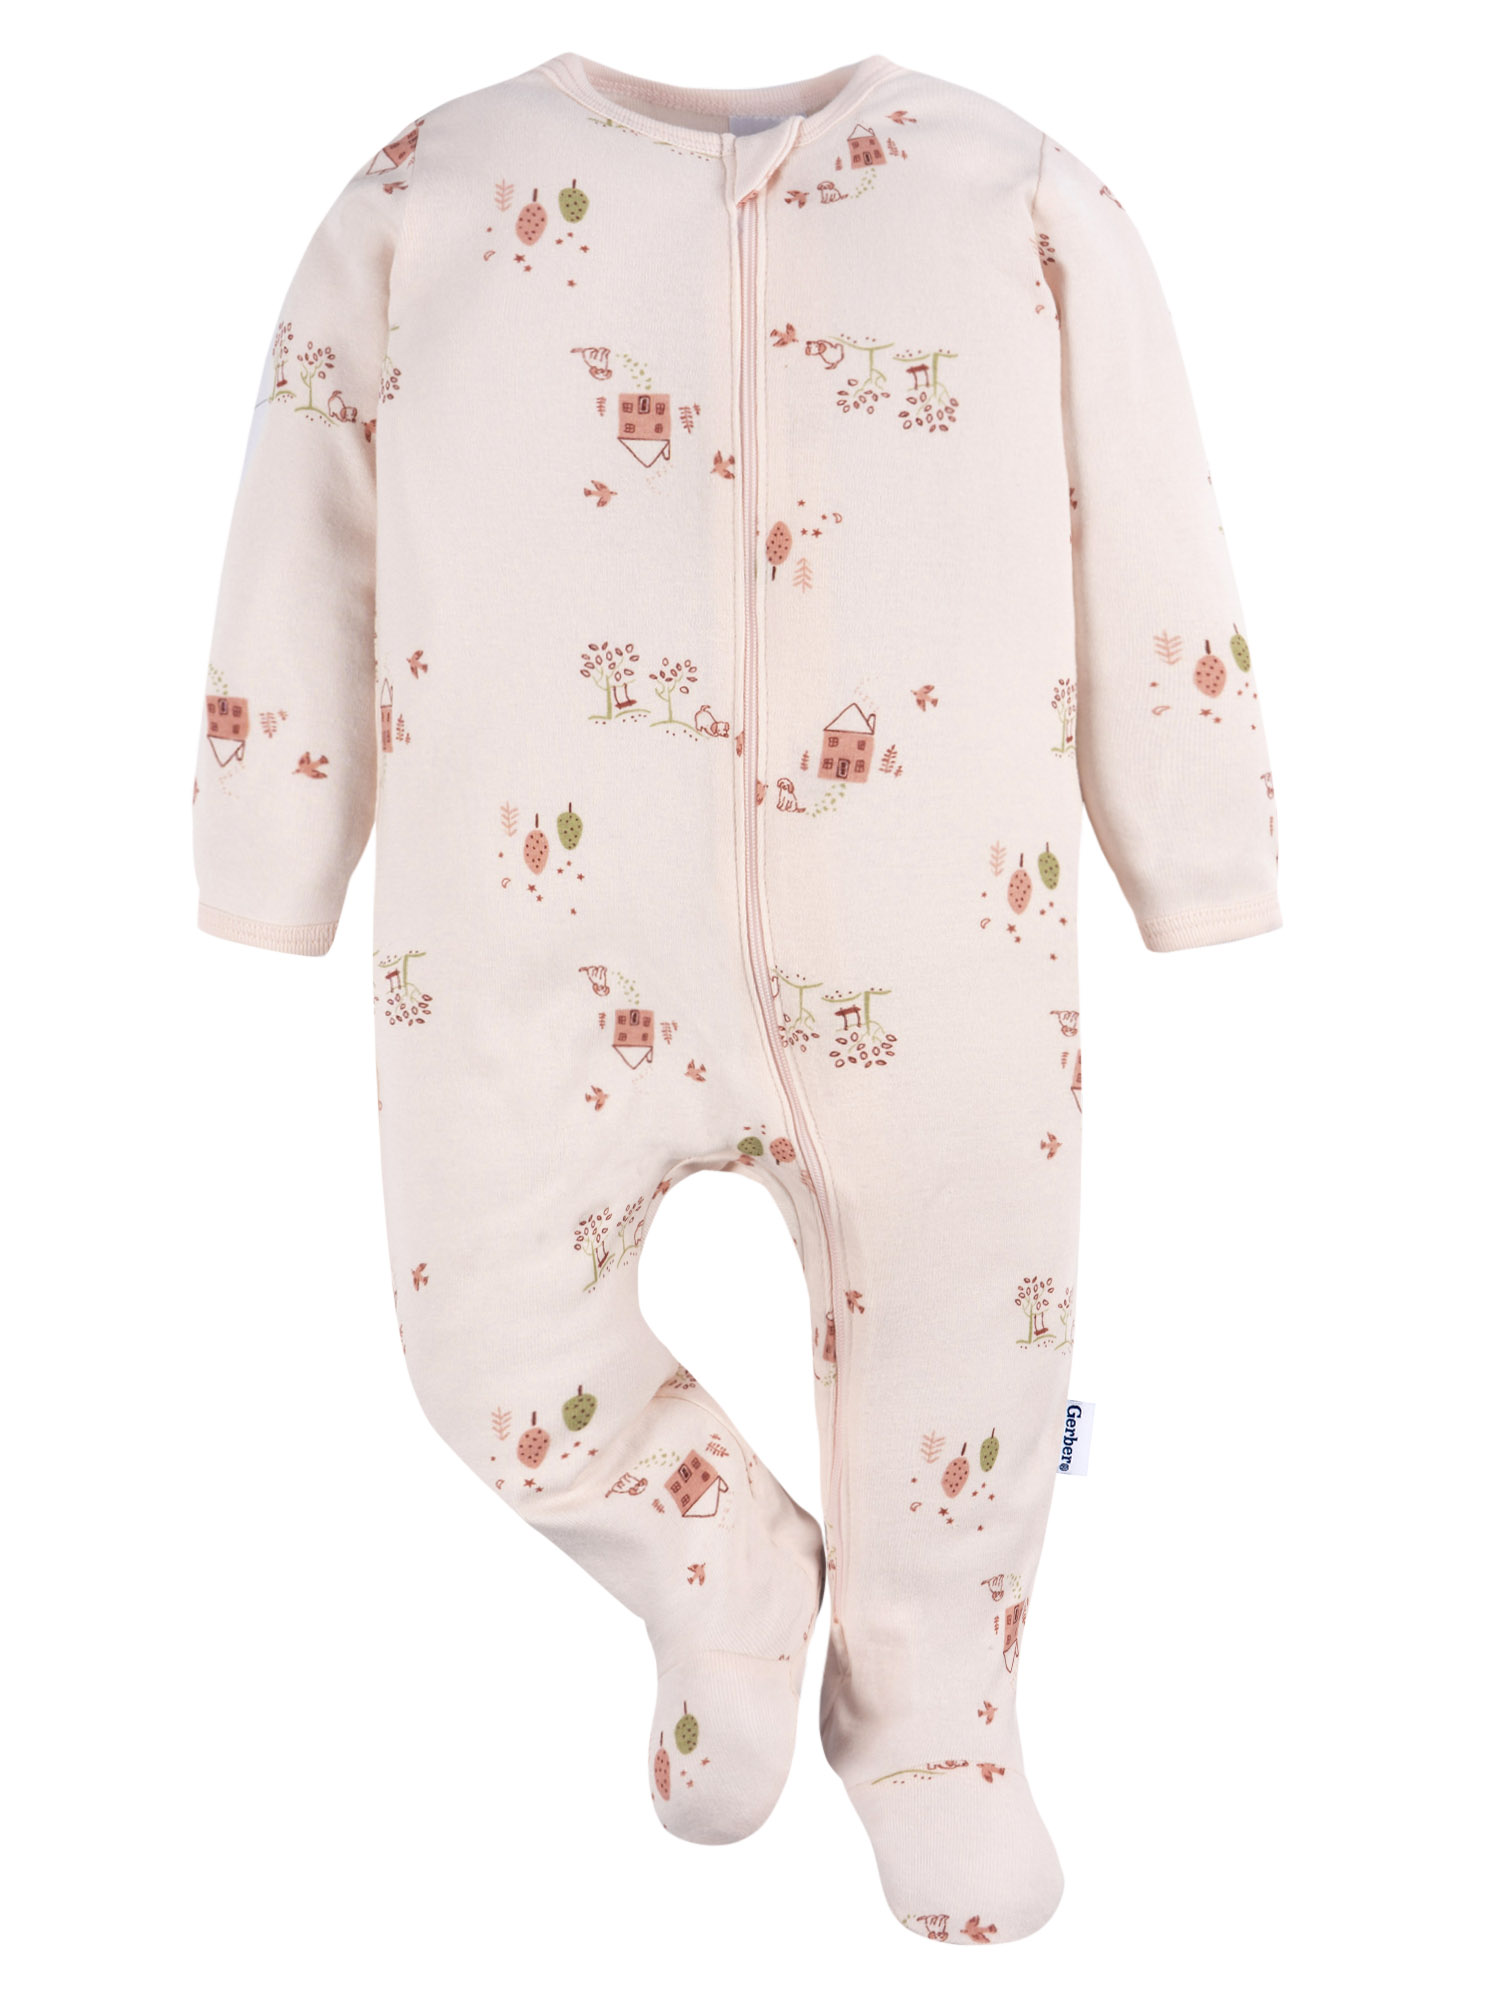 Gerber Baby Girl Sleep´N Play Footed Cotton Pajamas, 2-Pack, Sizes Newborn - 3/6 Months - image 2 of 12